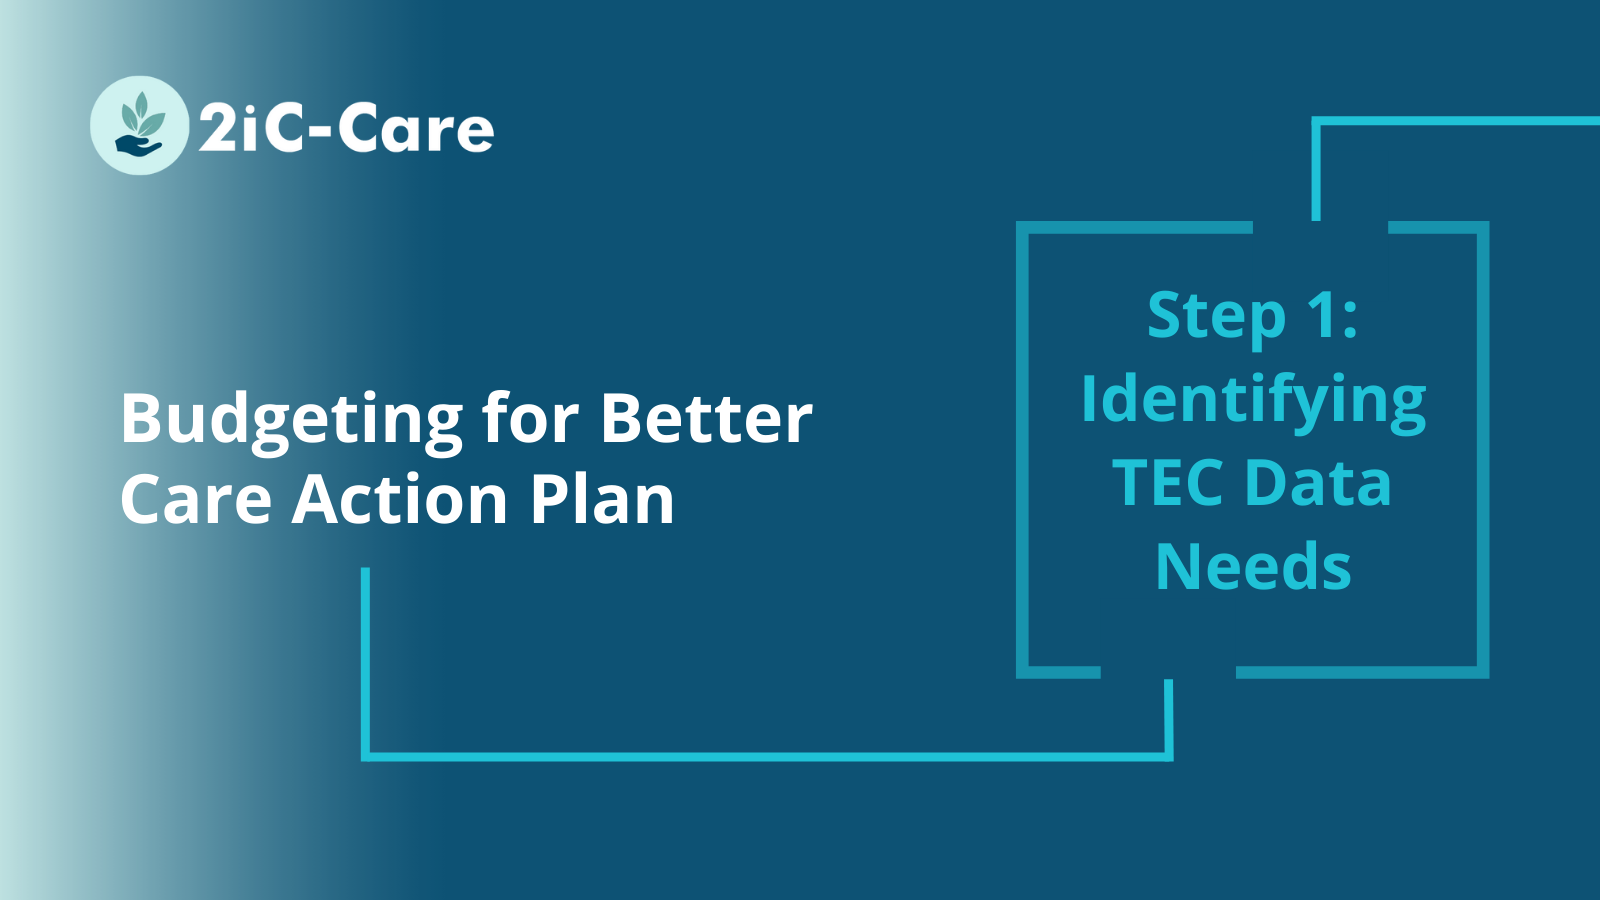 Budgeting for Better Care: Identifying TEC Data Needs